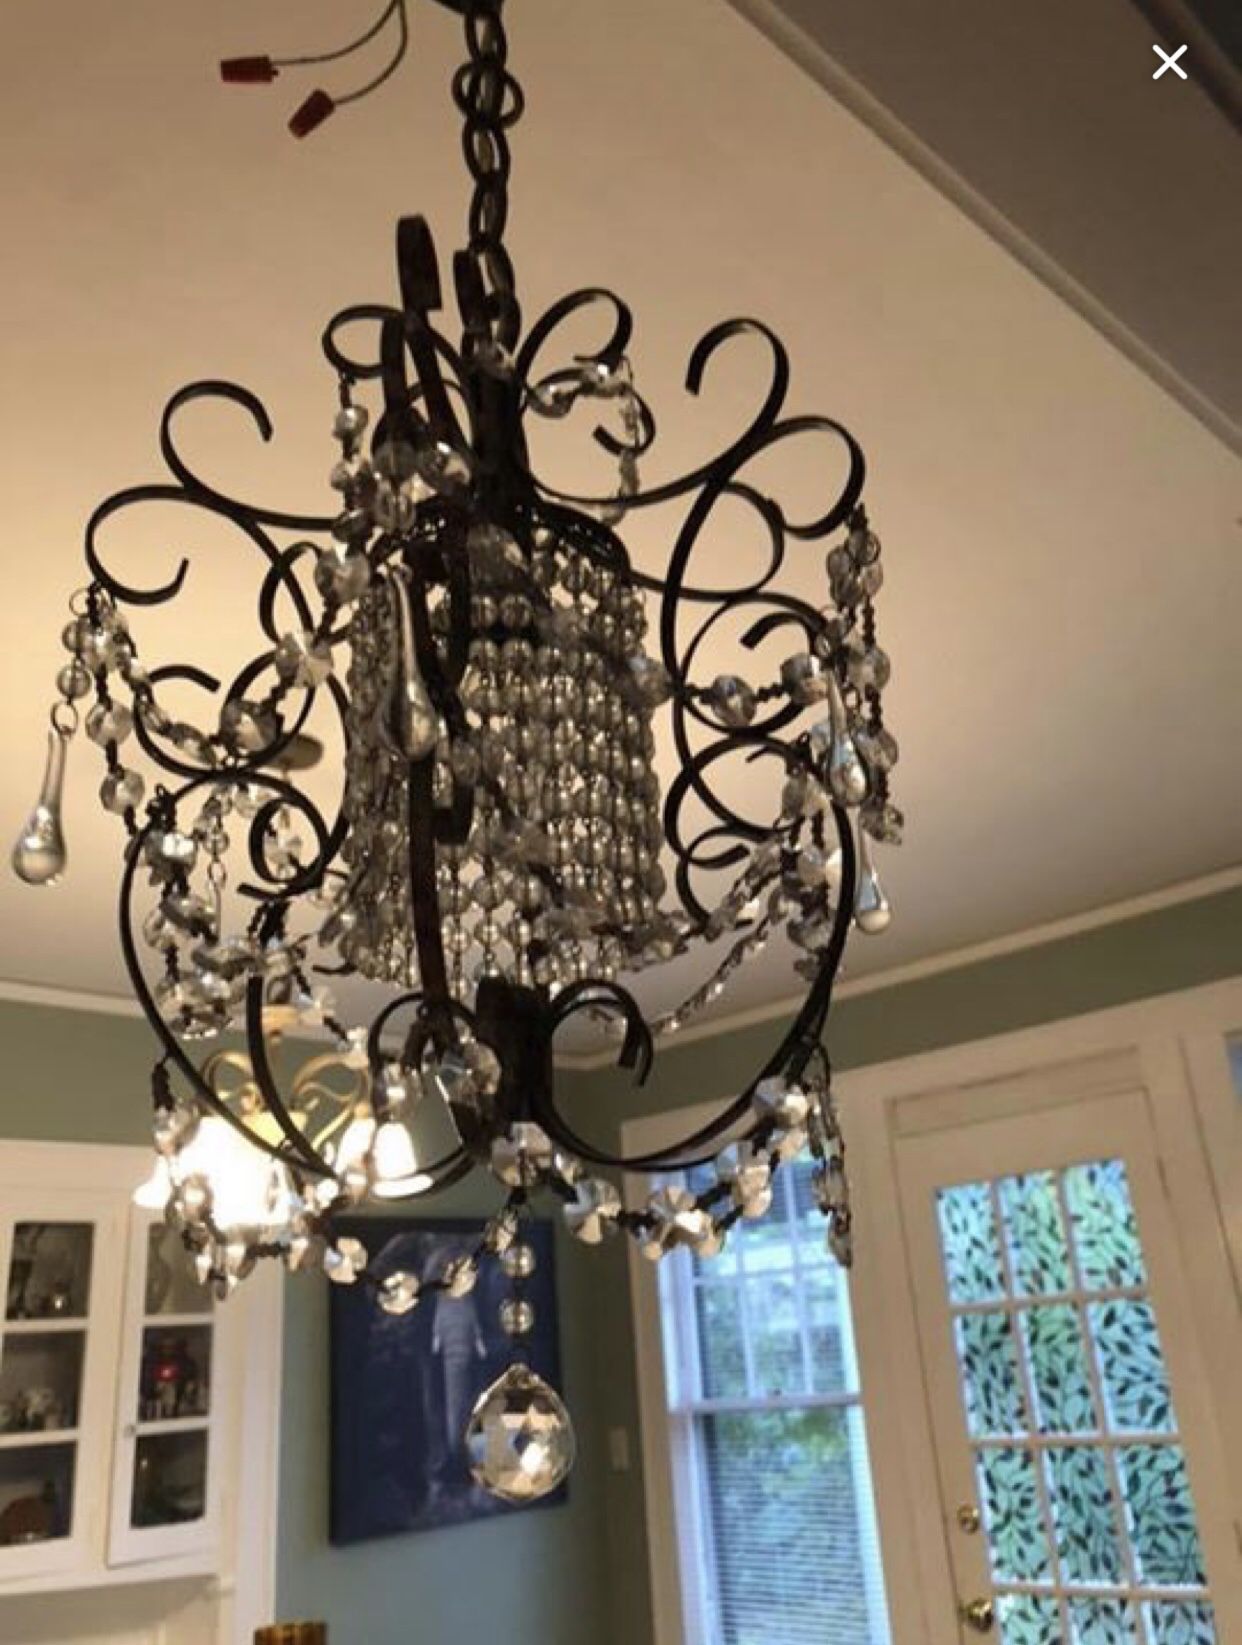 Small glass ceiling chandelier